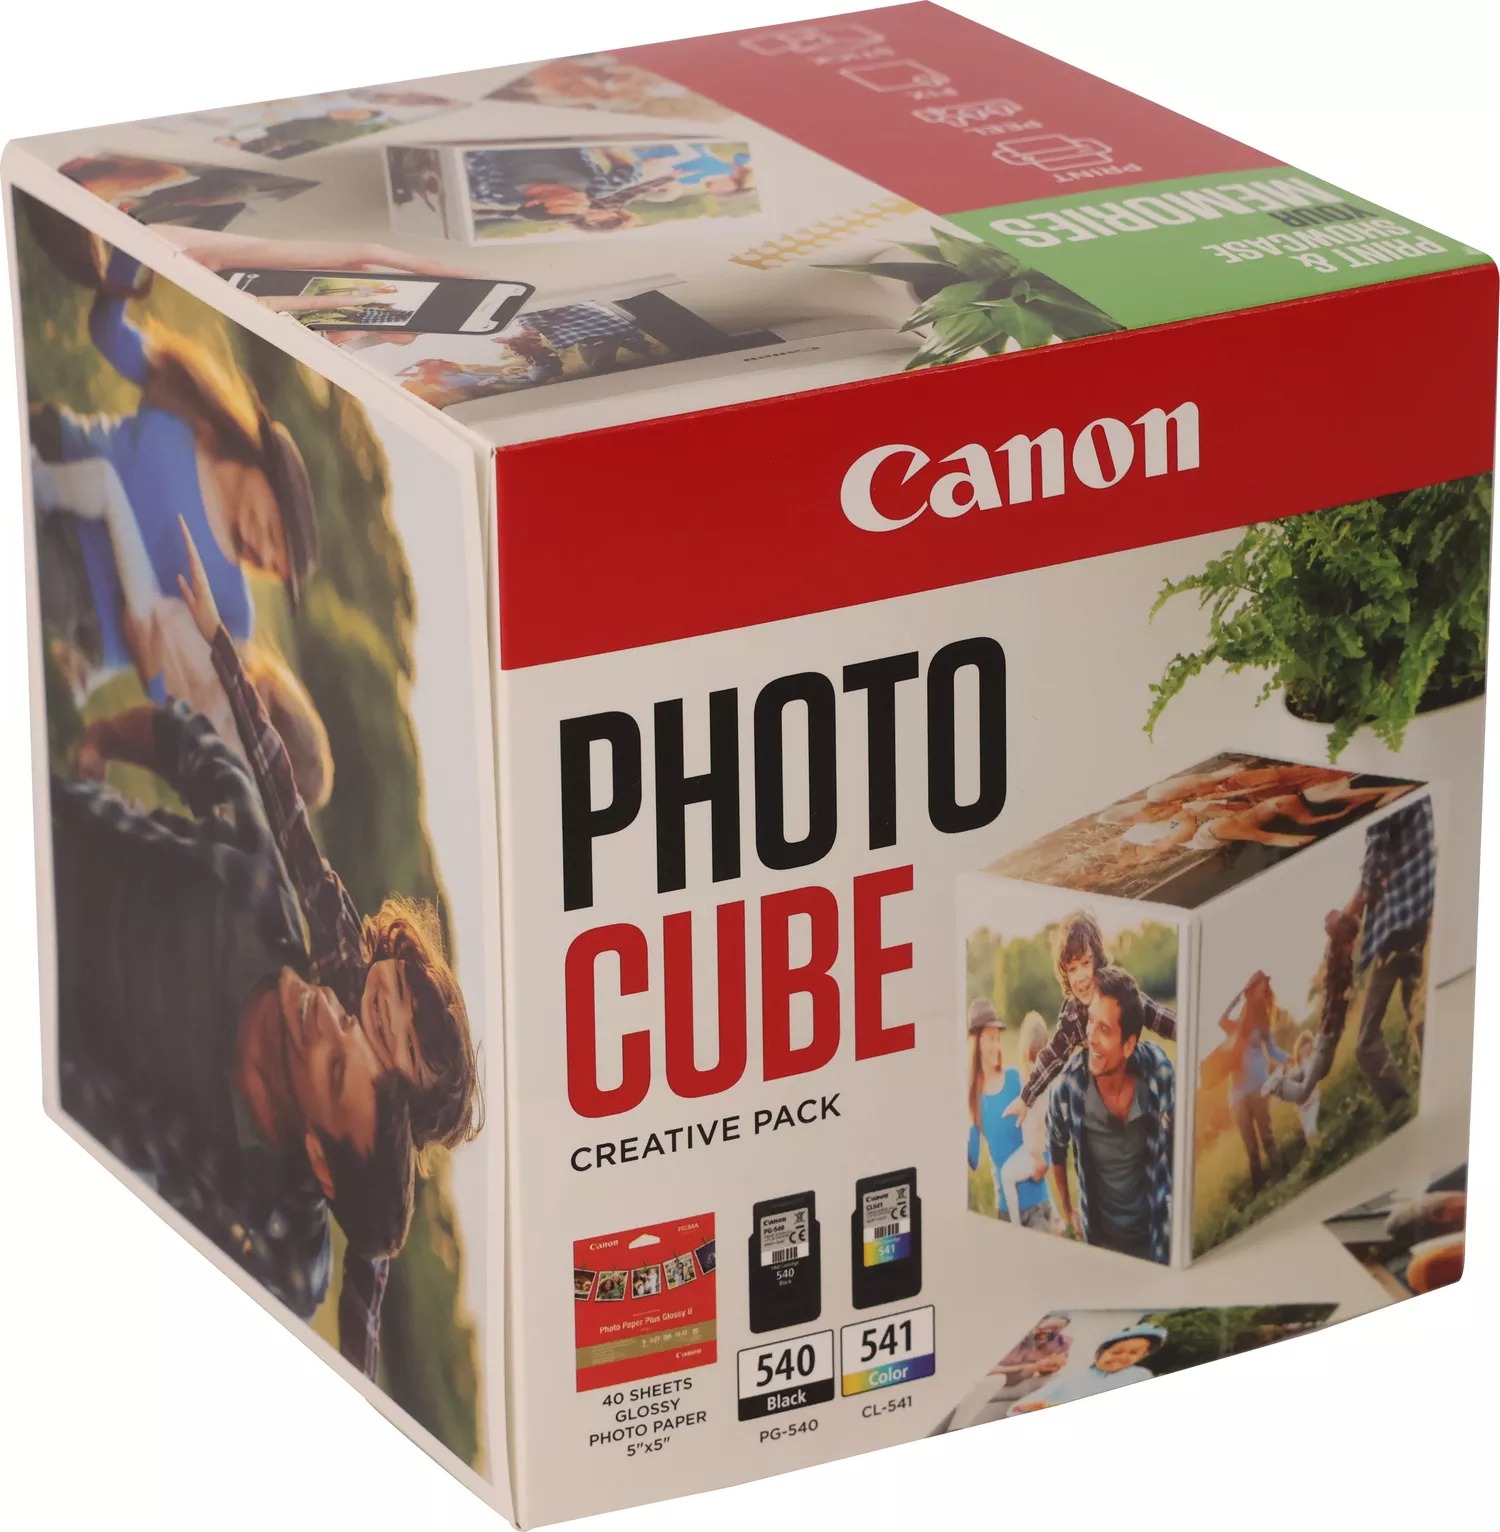 Original Canon PG-540 / CL-541 Photo Cube Ink Cartridges & Glossy Photo Paper Pack Green (5225B019)